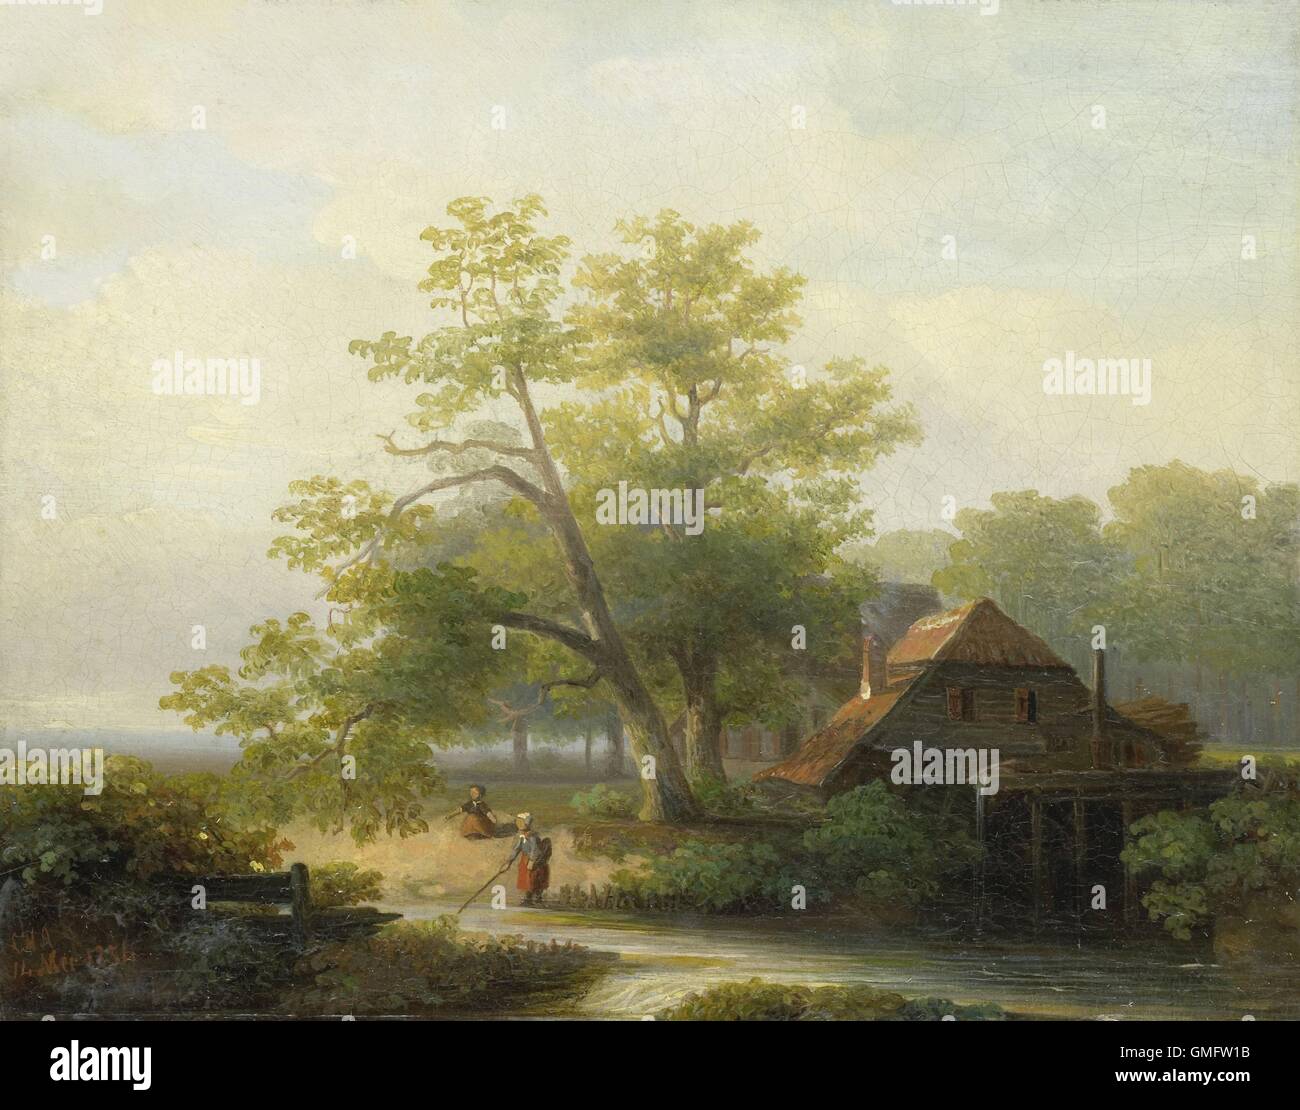 A Watermill in a Woody Landscape, by Lodewijk Hendrik Arends, 1854, Dutch oil painting on panel. One girl fishes in the stream as another sits nearby. (BSLOC 2016 1 200) Stock Photo